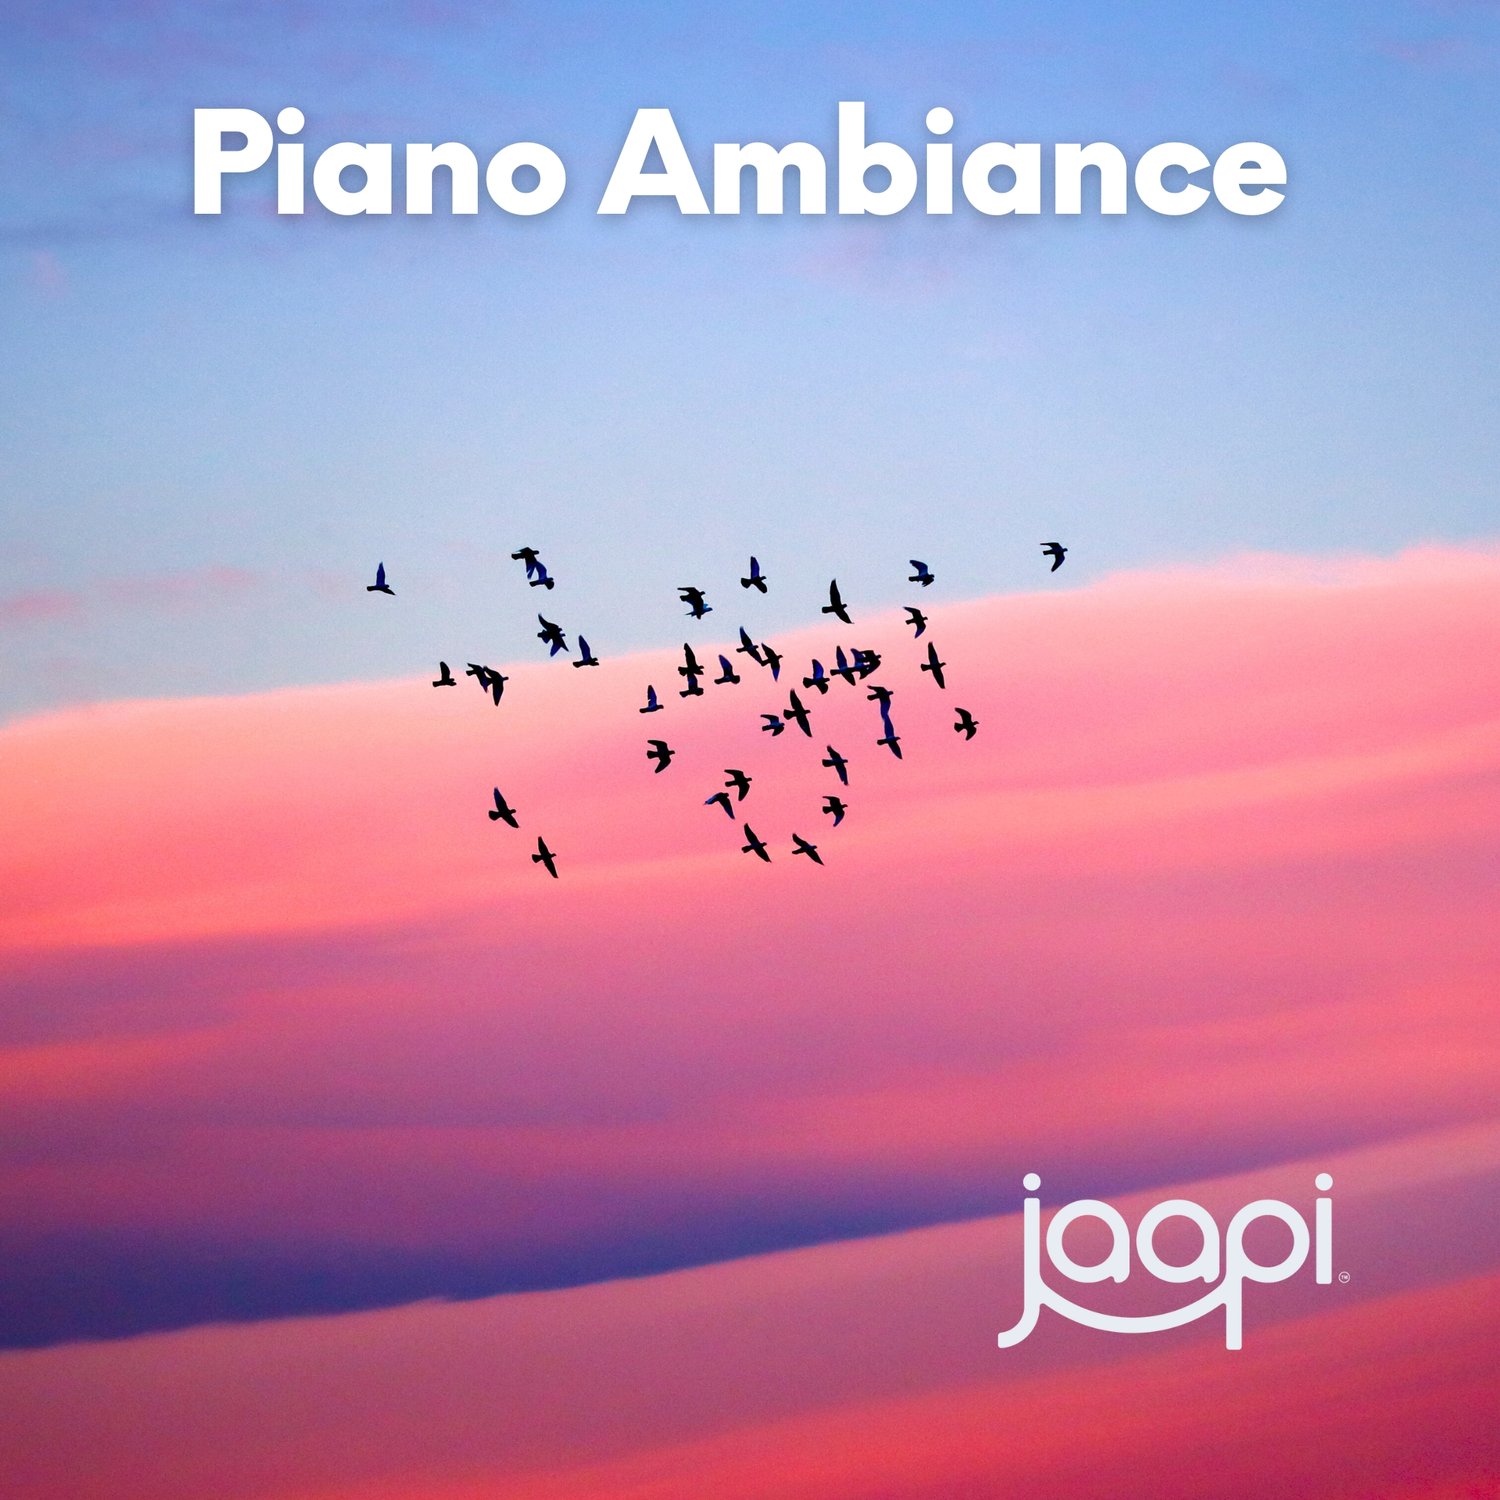 Piano Ambiance: Relaxing piano melodies for the spirit. Curated by Jaapi Media.